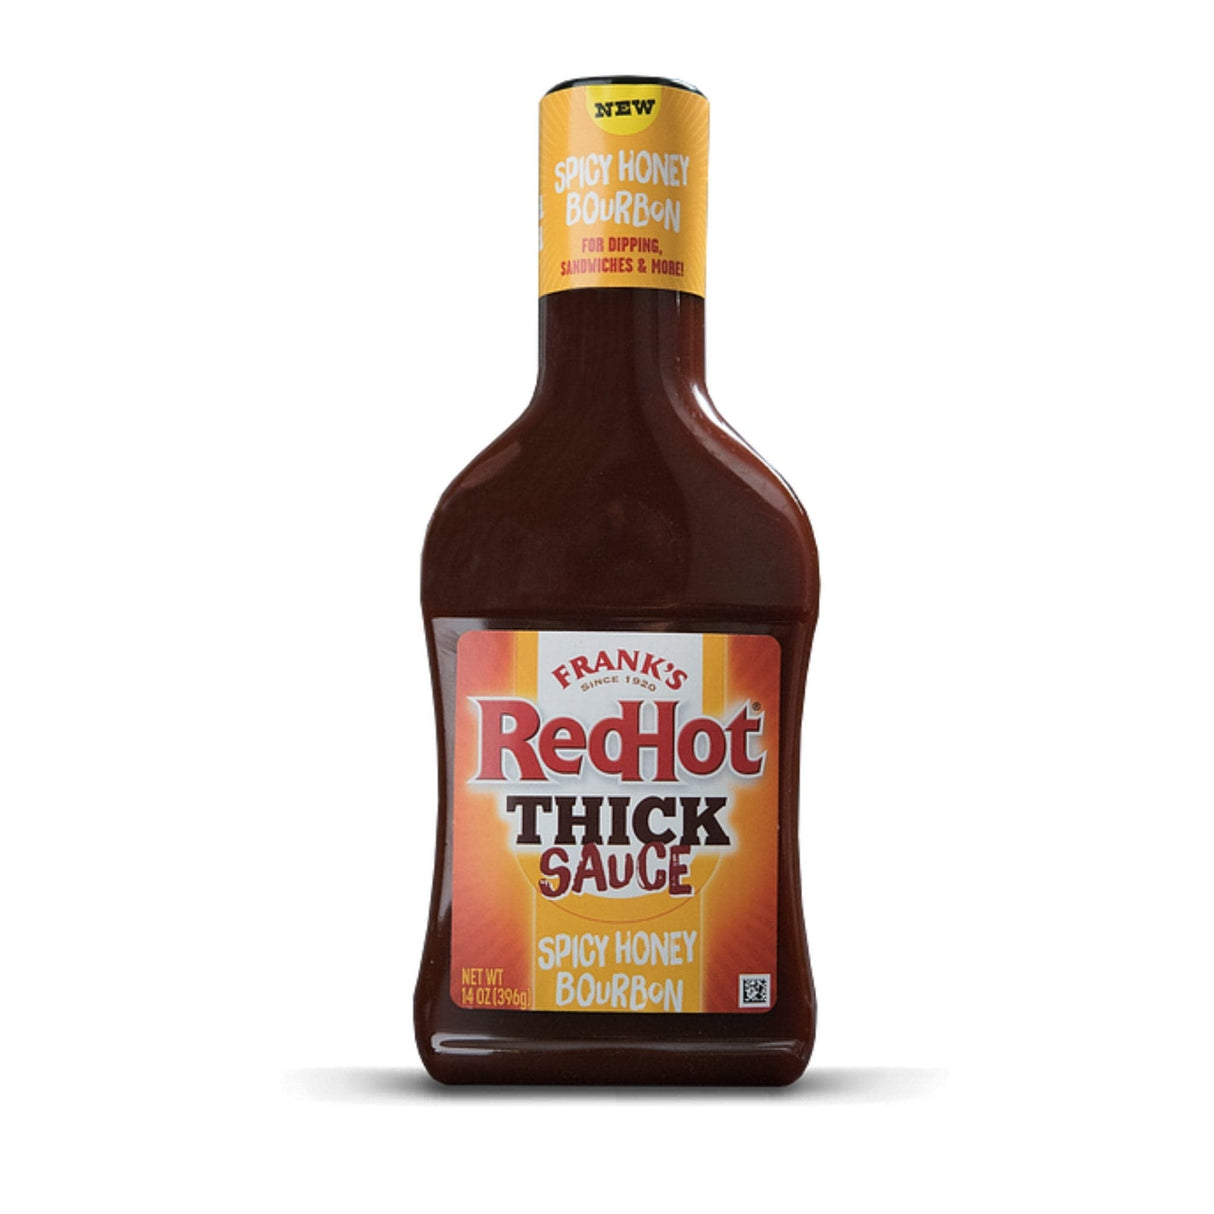 Frank's RedHot Thick Sauce Spicy Honey Bourbon - hot sauce market & more